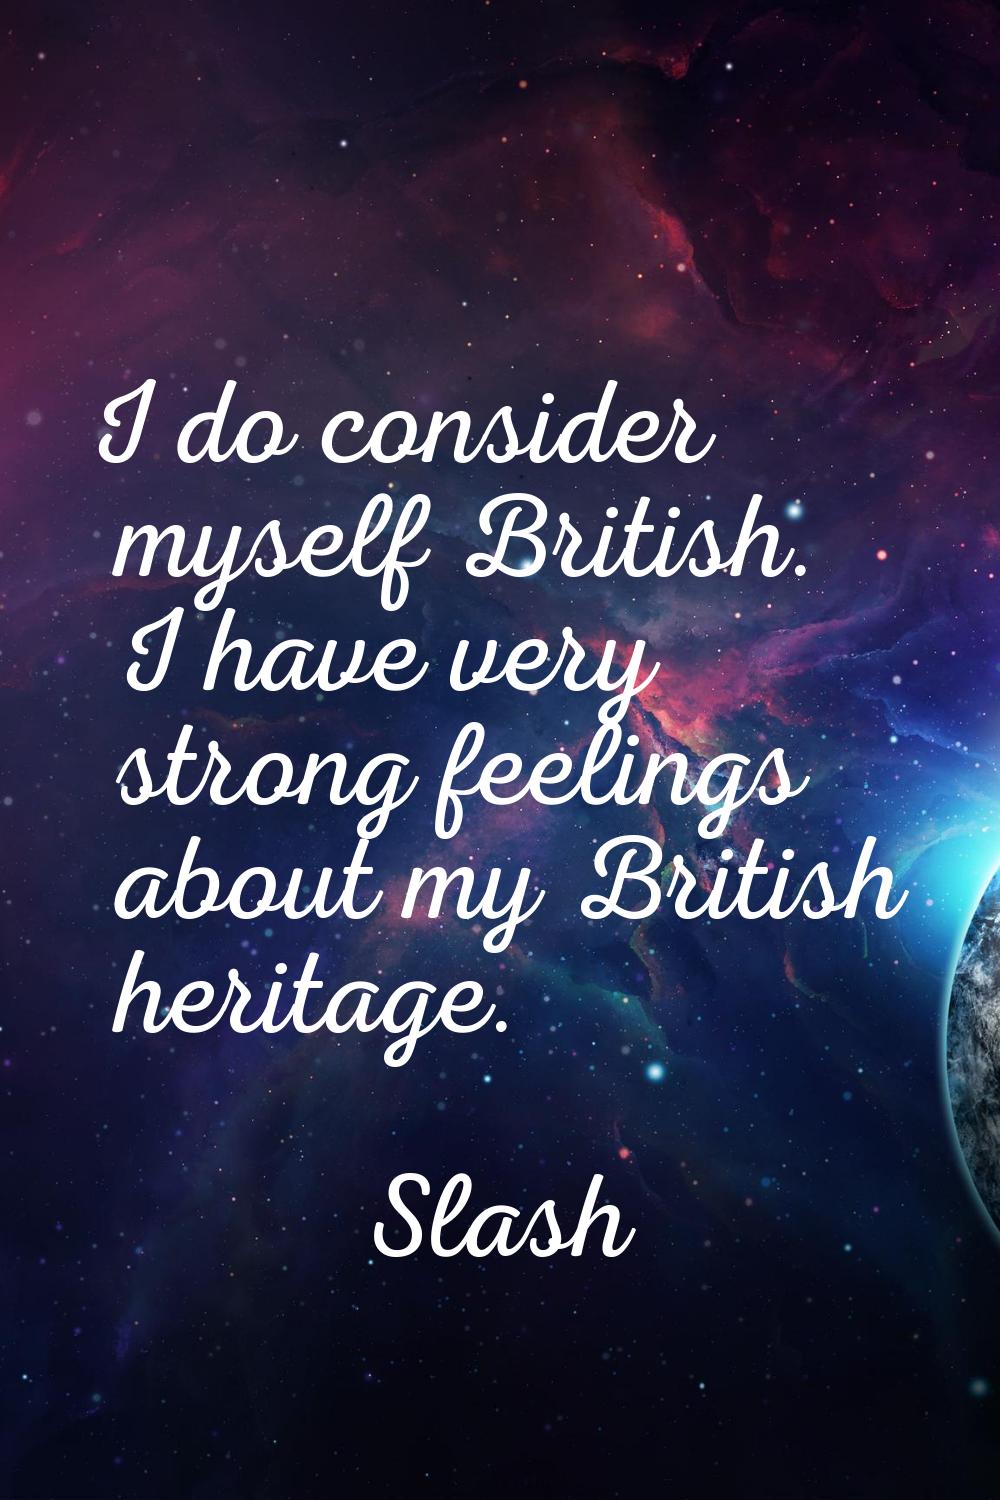 I do consider myself British. I have very strong feelings about my British heritage.